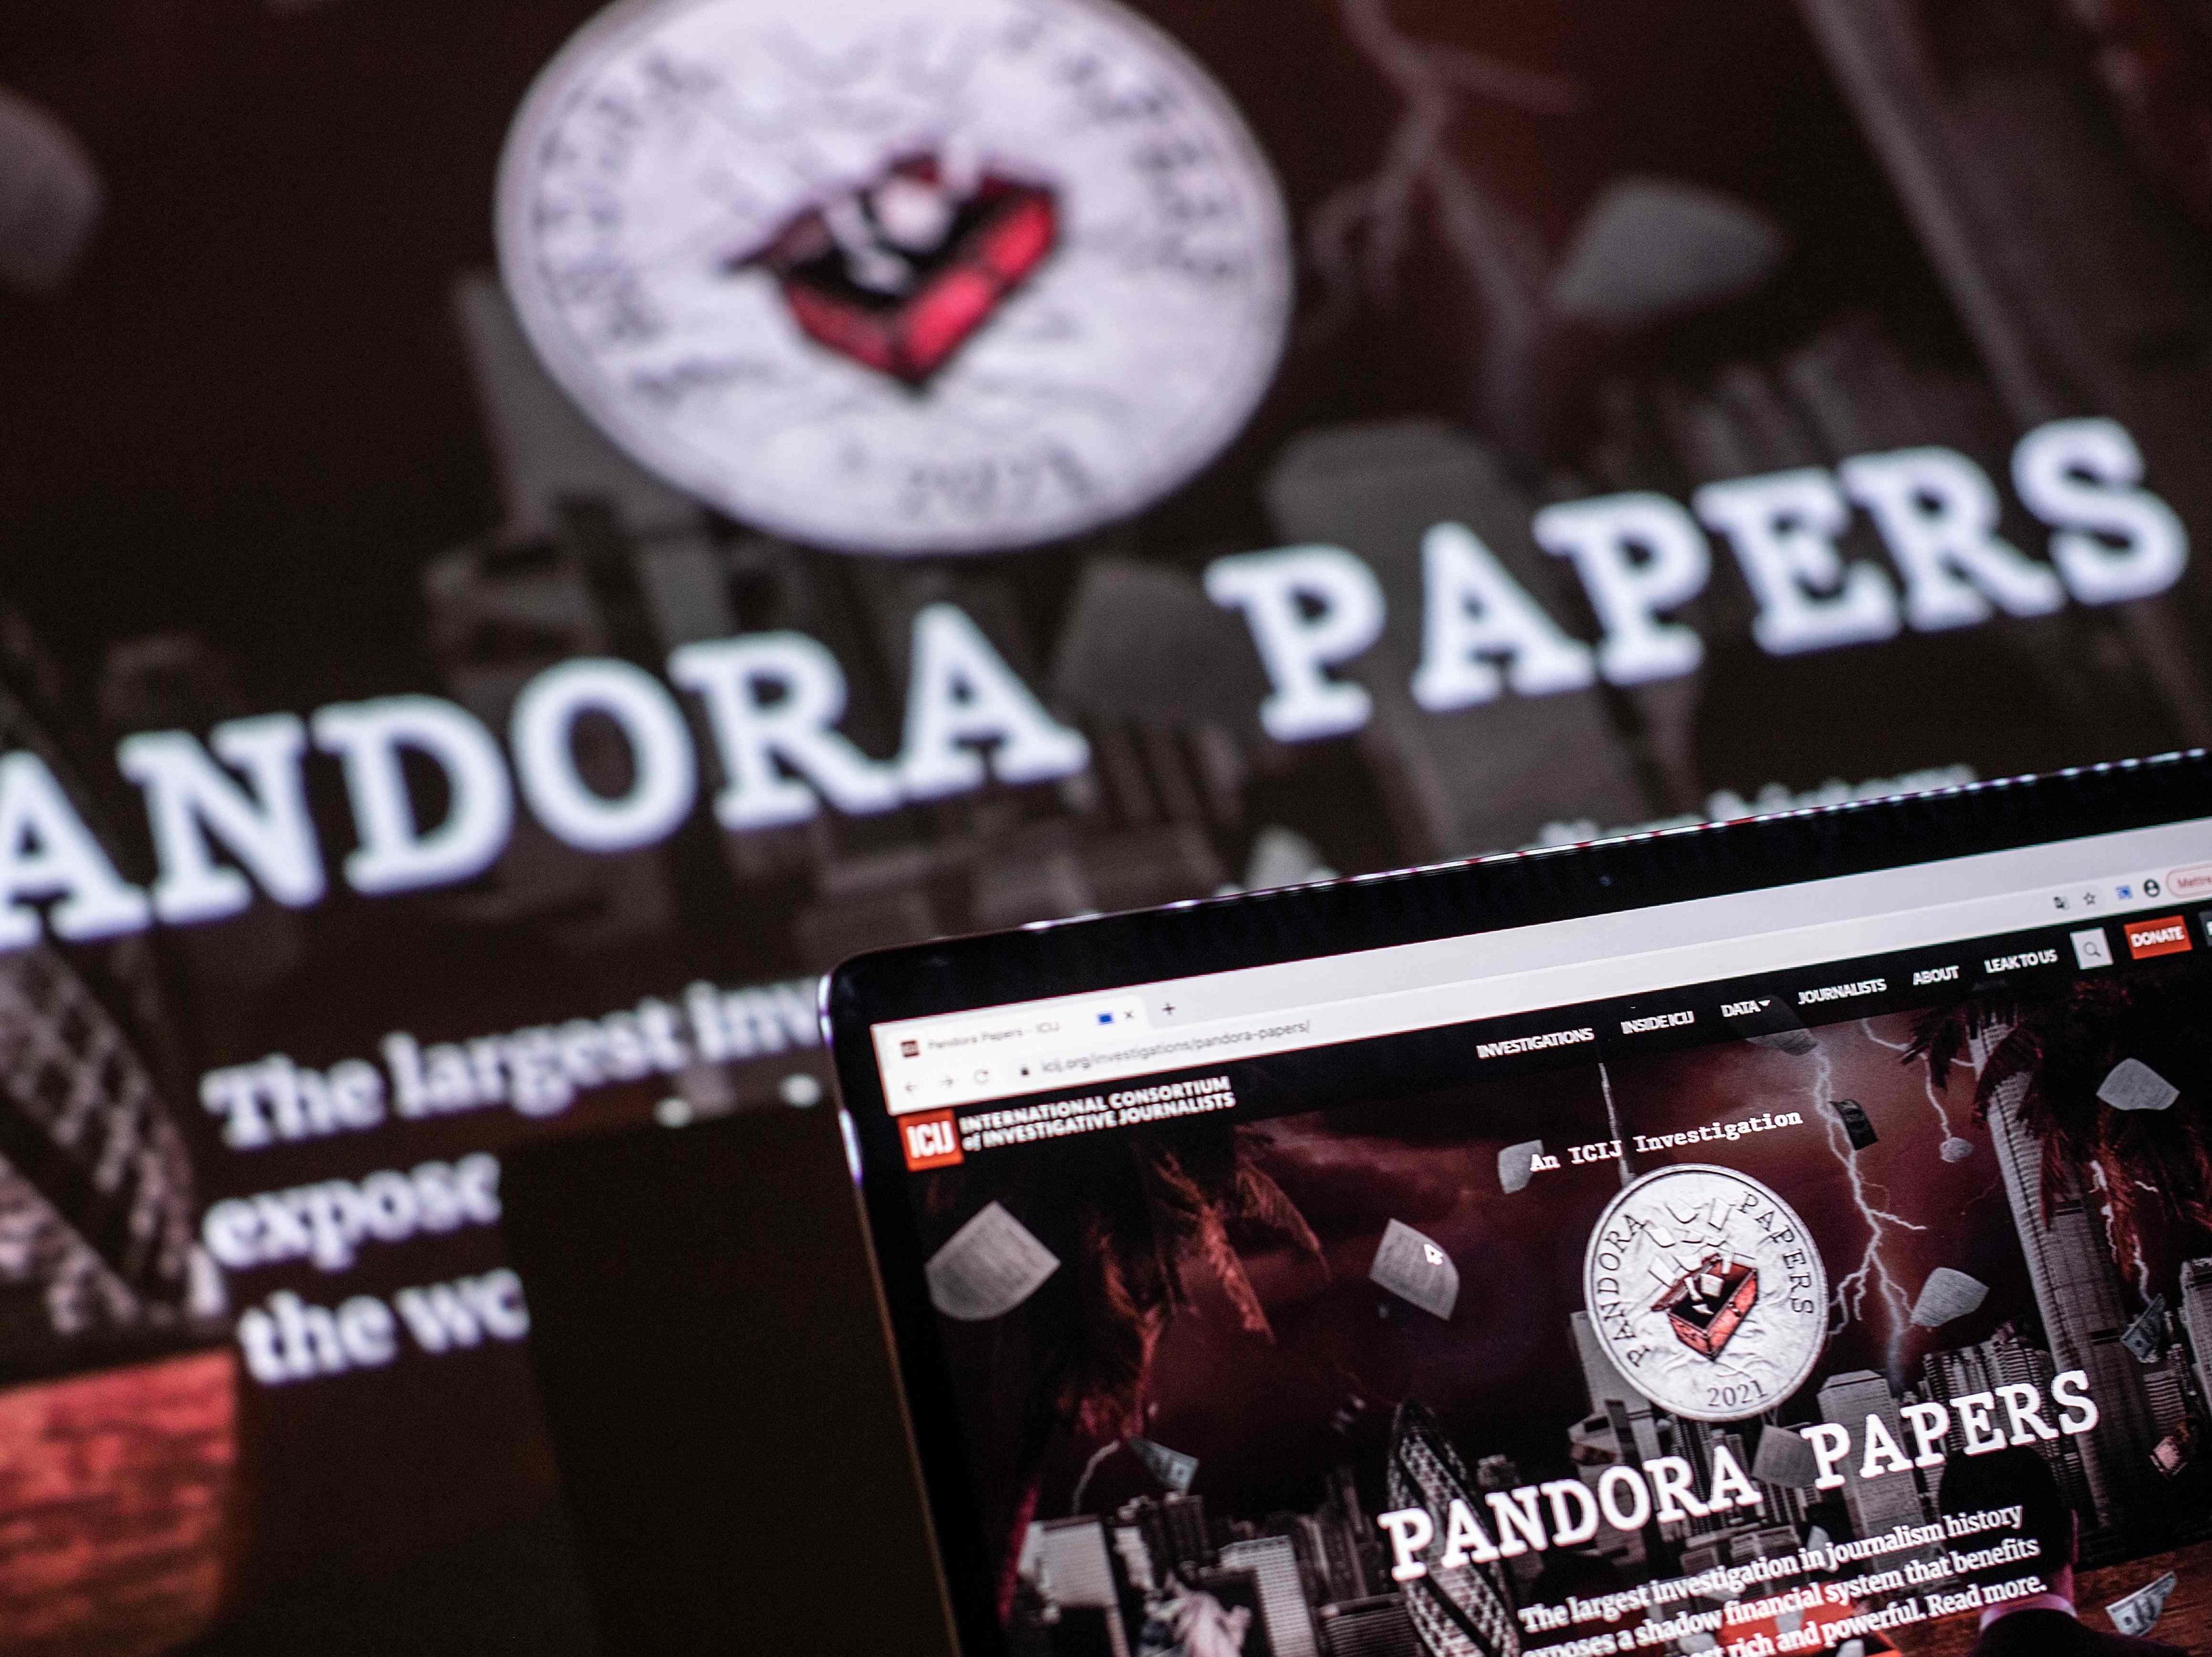 Pandora Papers involved a leak of more than 11.9 million records